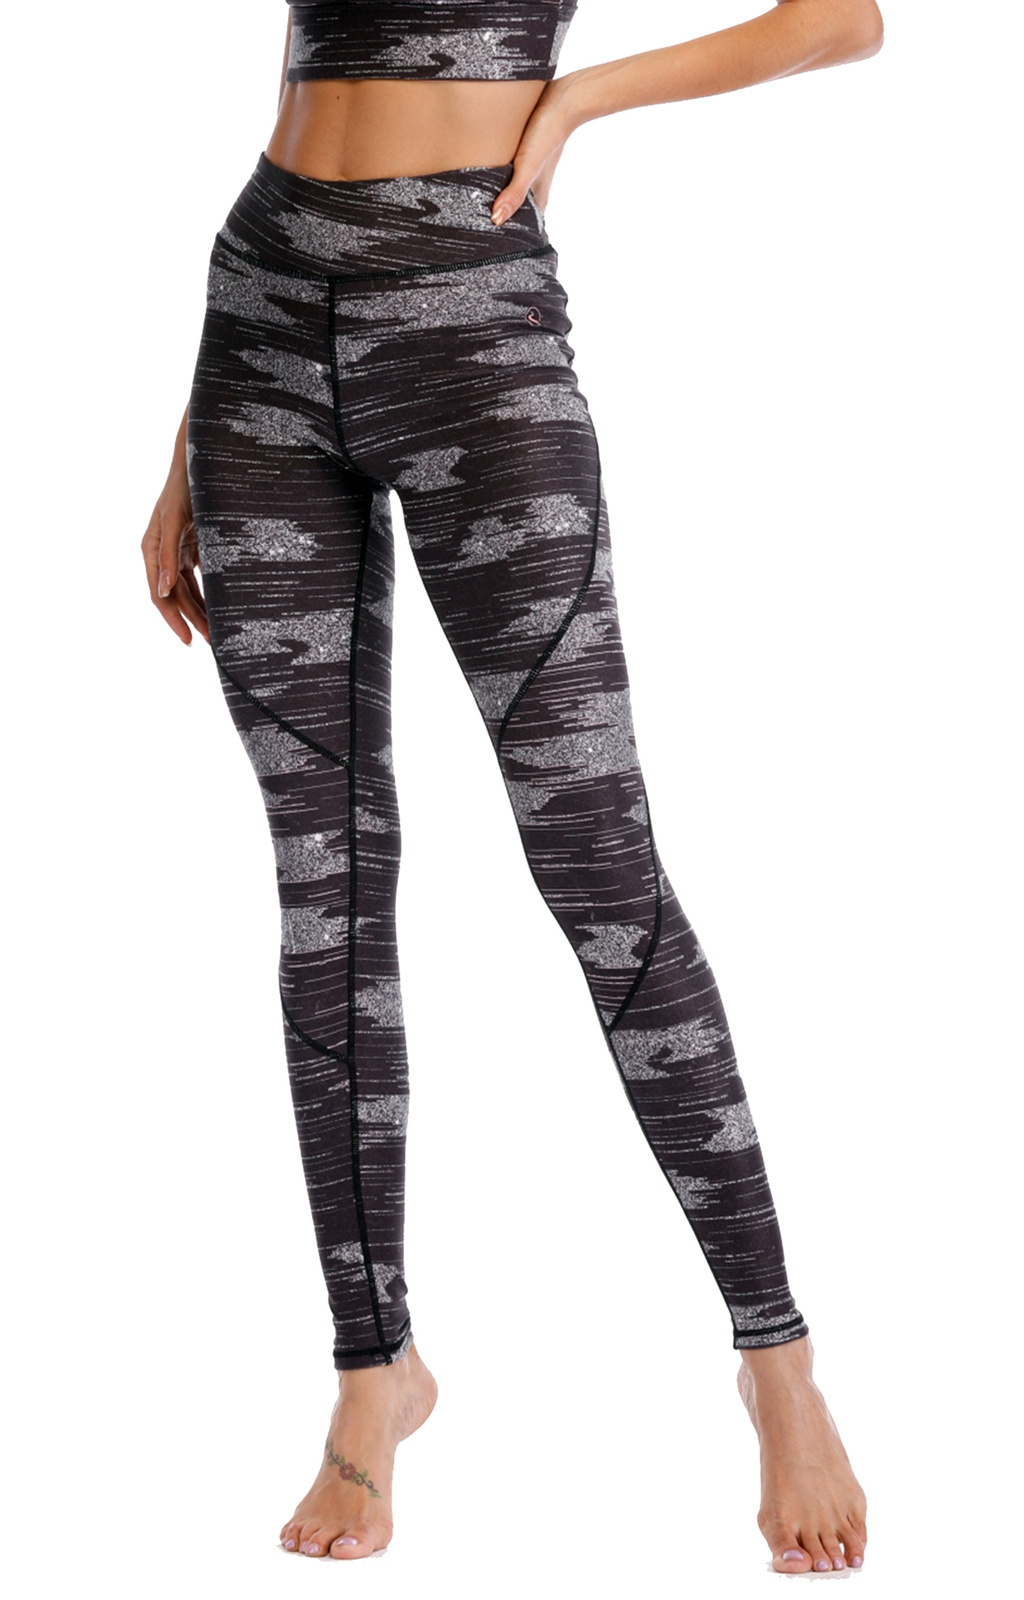 Primary image for High Waist Women Yoga Pants Leggings With Inner Pocket Black Camo Recycled Fabri